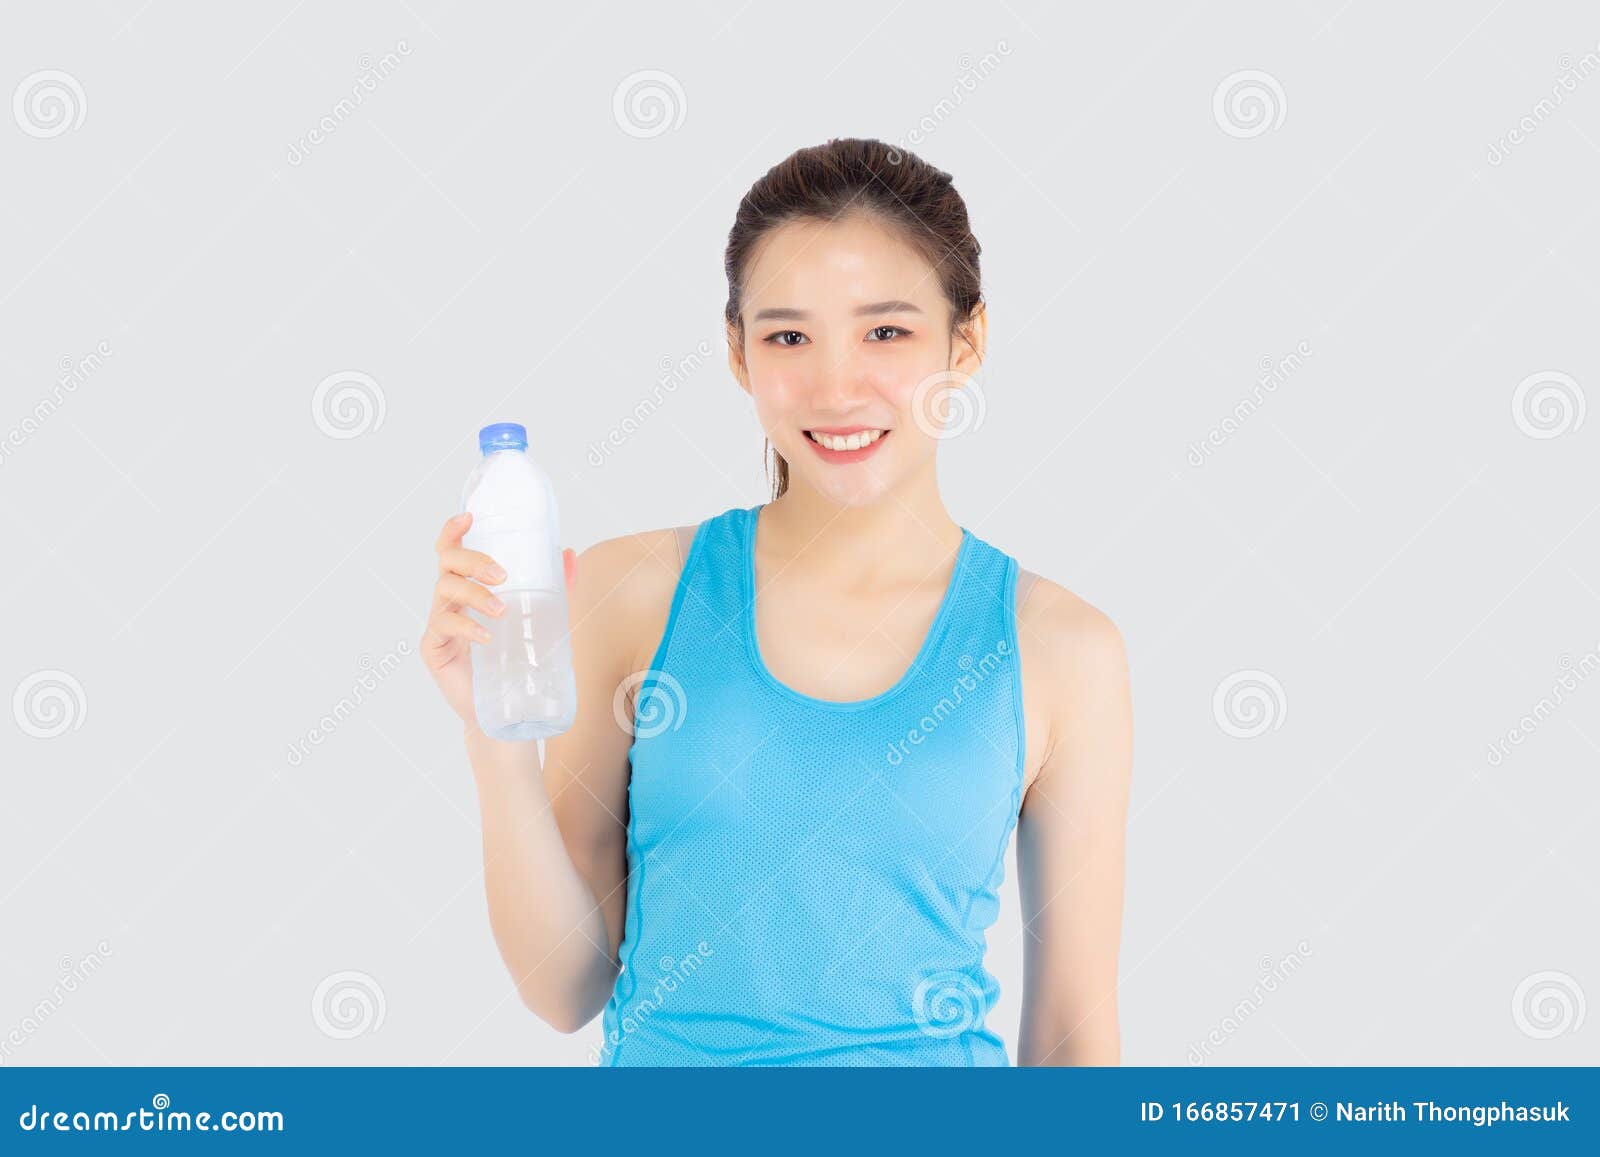 Attractive Sporty Young Woman Drinking from Blue Shaker Bottle in